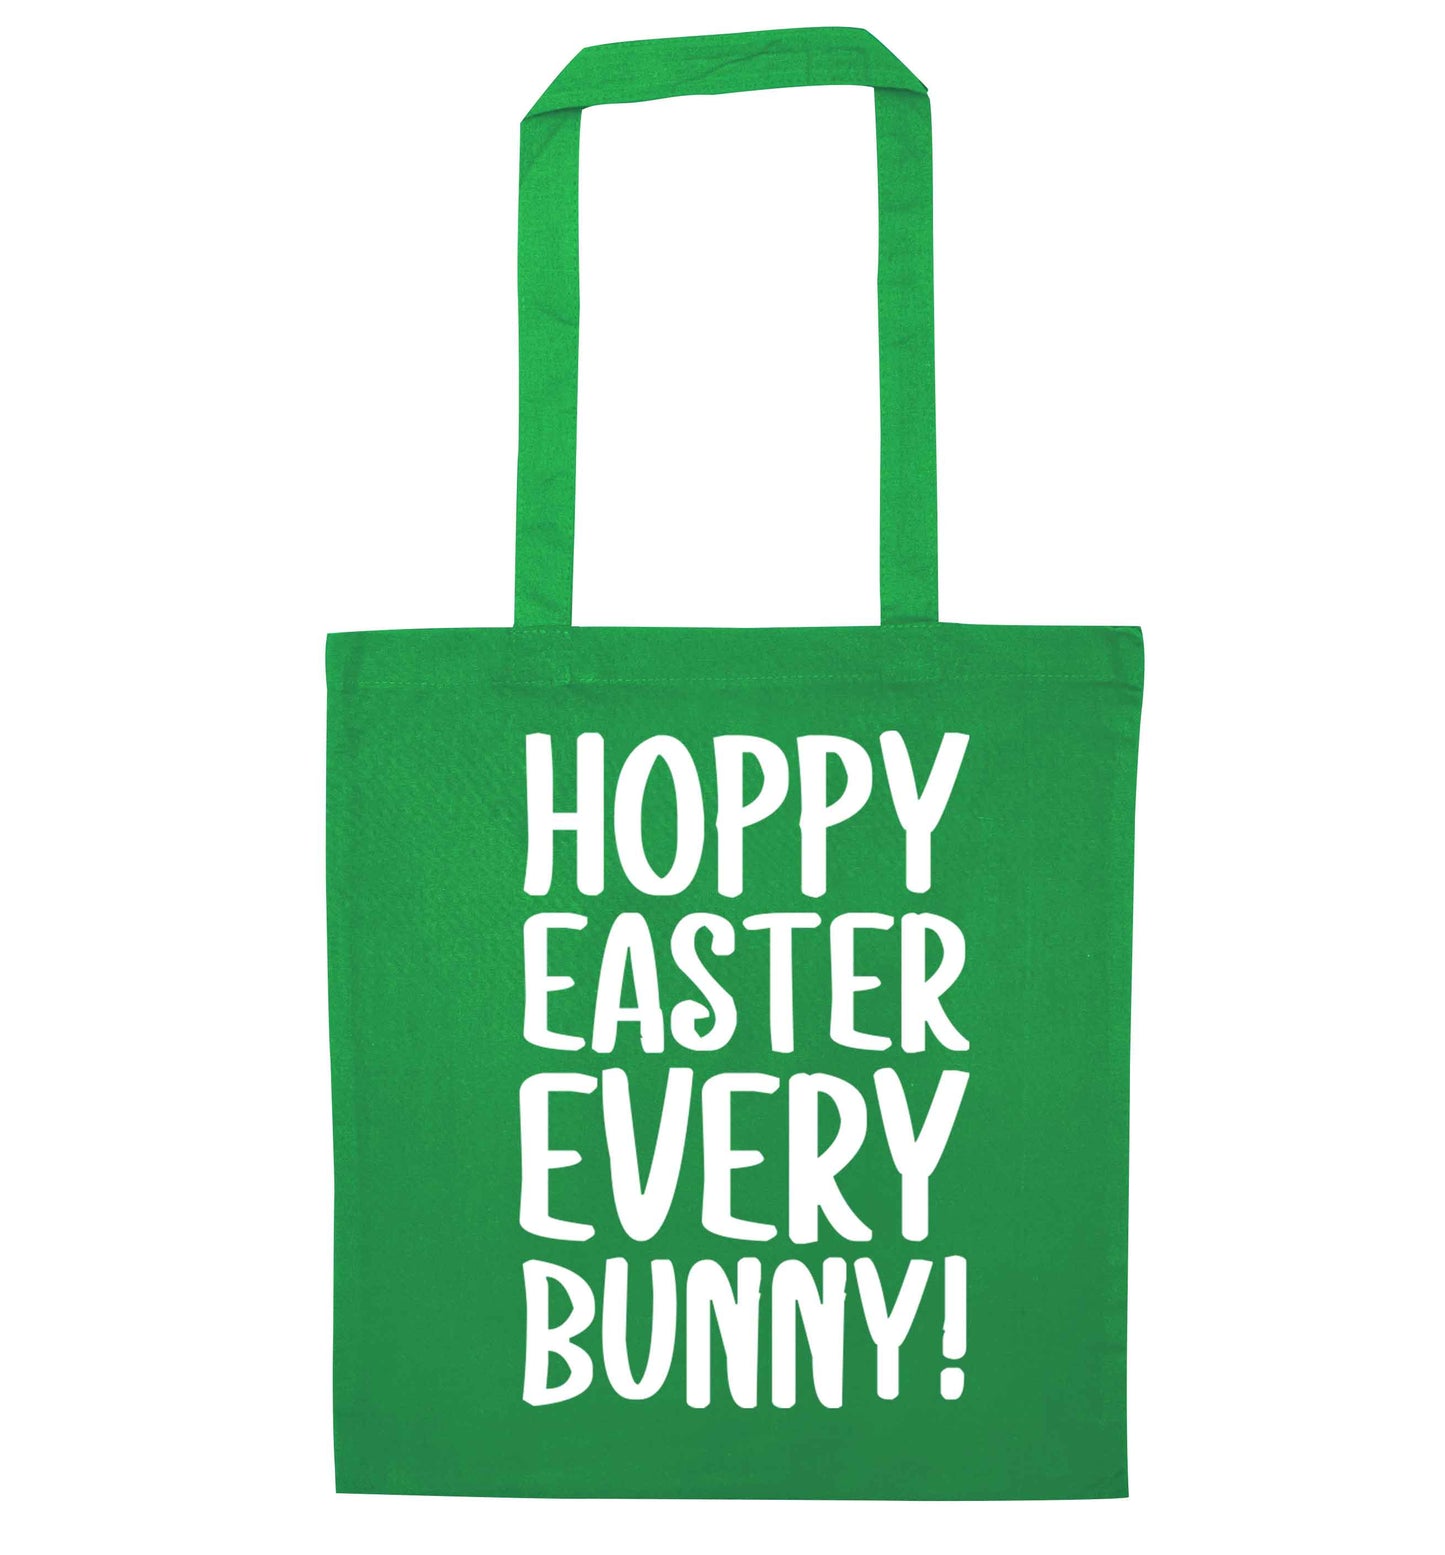 Hoppy Easter every bunny! green tote bag